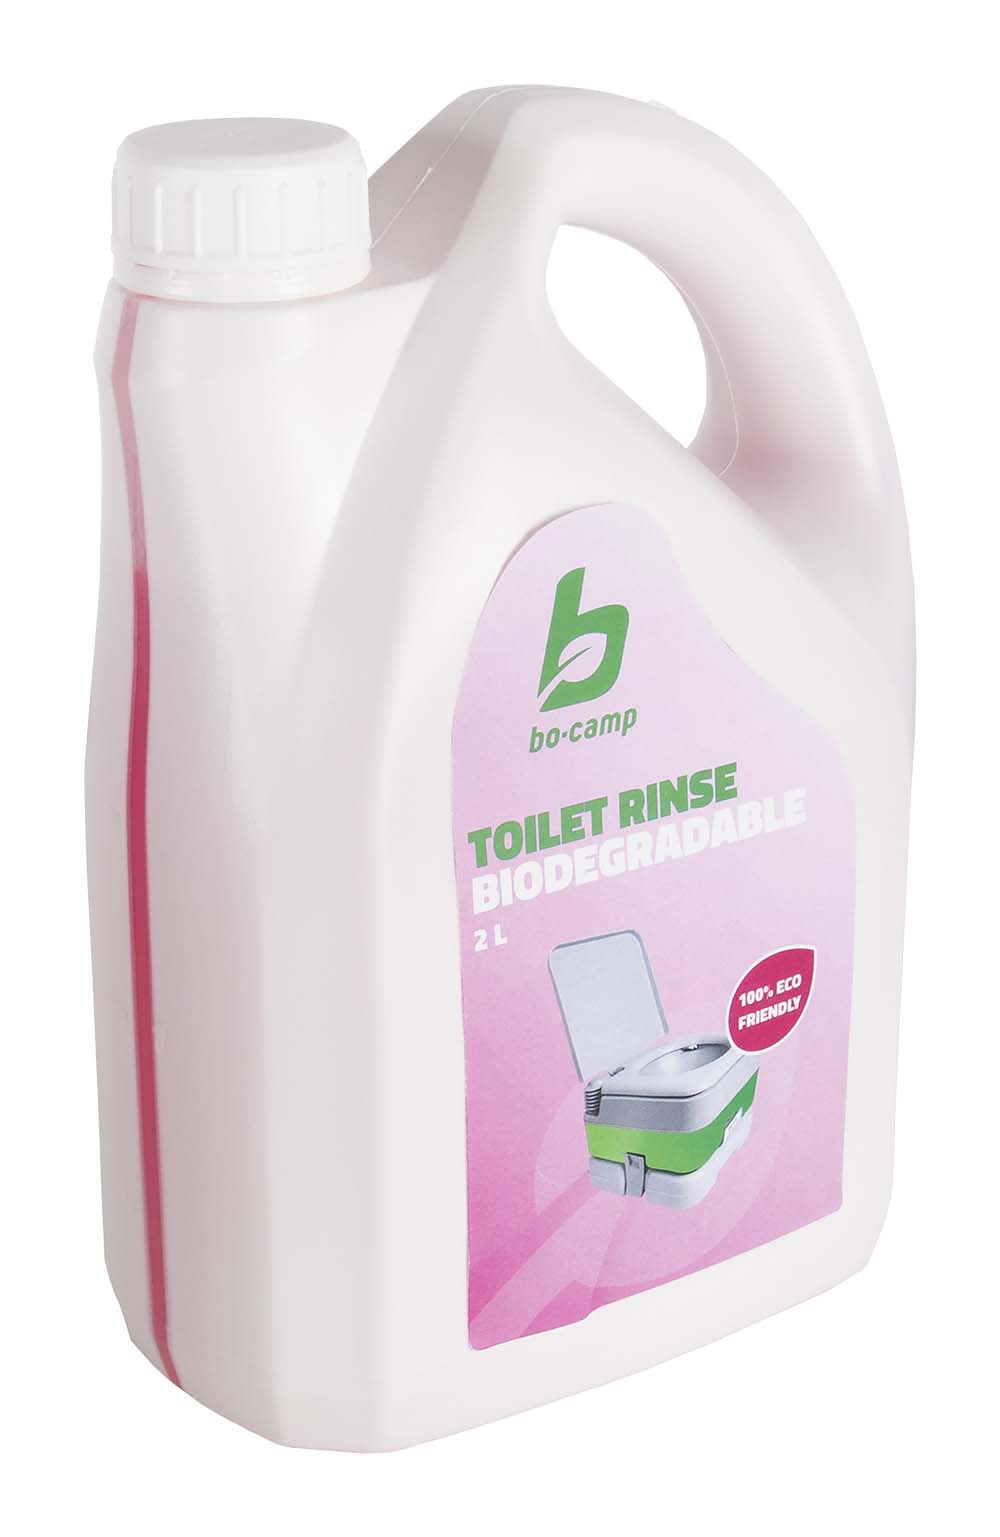 5507105 Bo-Camp Toilet Fluid rinse is a biodegradable toilet fluid for daily use in the rinse water tank of the portable toilet. It provides a fresh scent and helps prevent limescale. It also provides easy rinsing of the toilet and has a lubricating effect for the slide of the tank. A 2 liter bottle is suitable for approximately 20 refills.